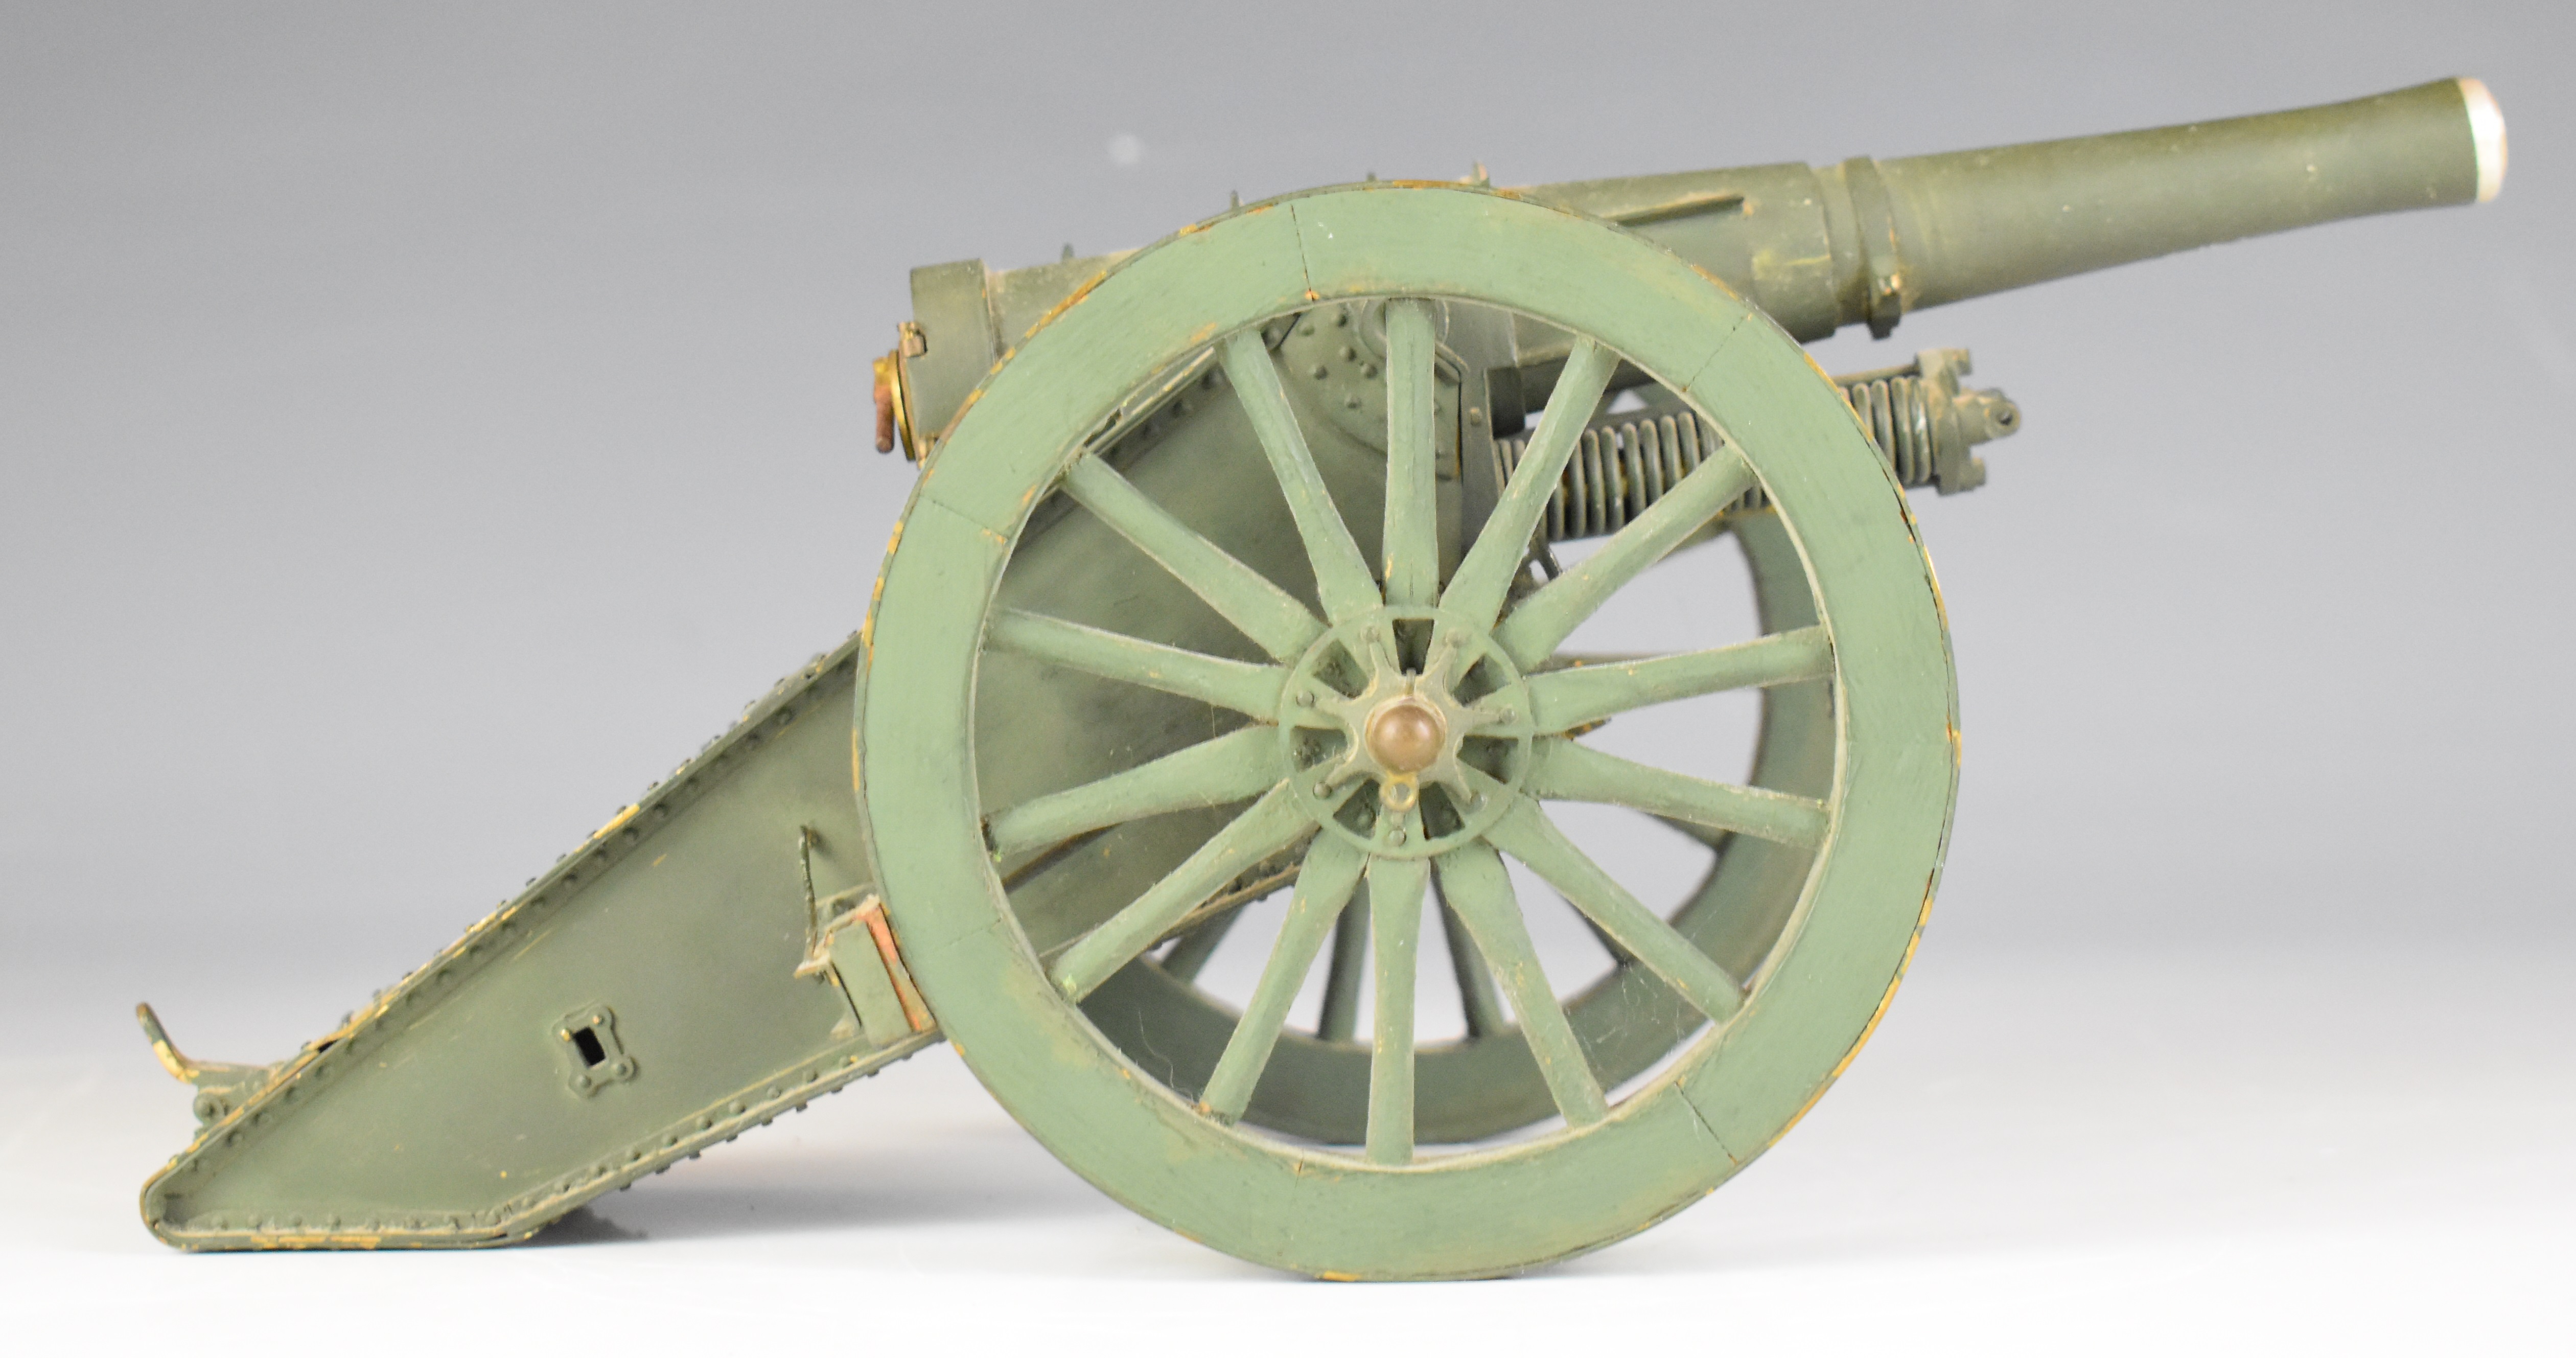 Breech loading desk cannon or field gun with 7 inch graduated barrel, overall length 28.5cm. - Image 4 of 8